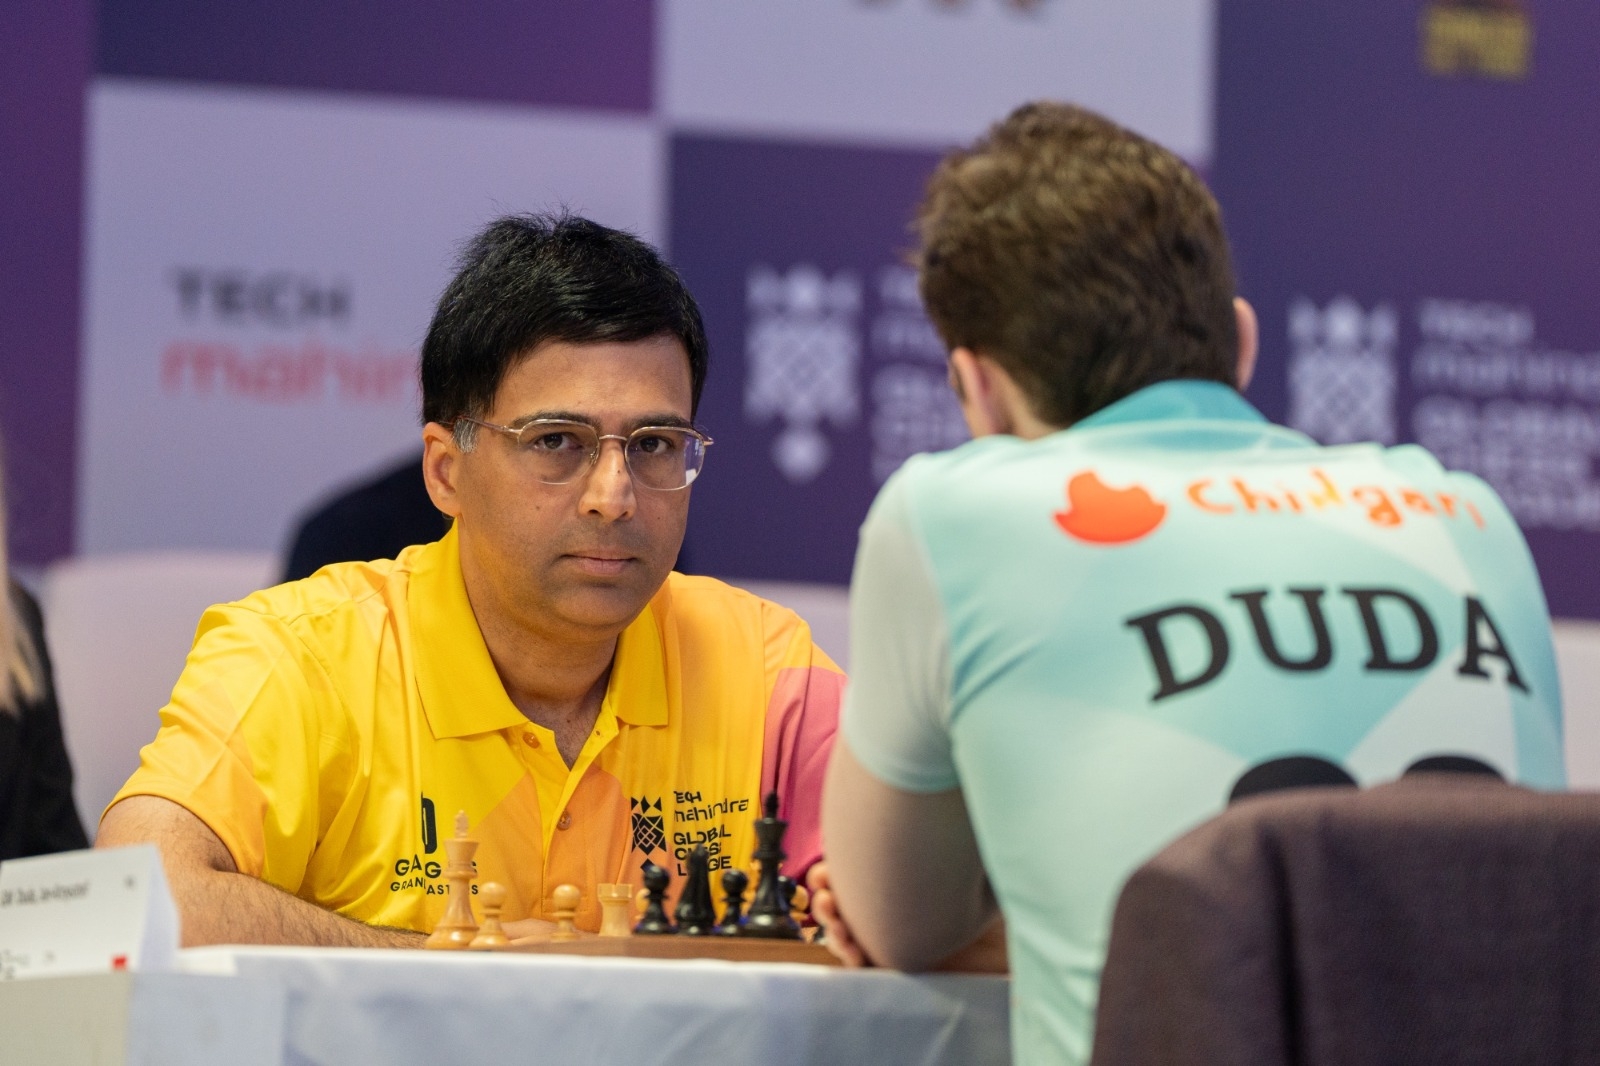 Global Chess League: Competing after nearly eight months, Viswanathan Anand  defeats Duda to seal win for Ganges Grandmasters